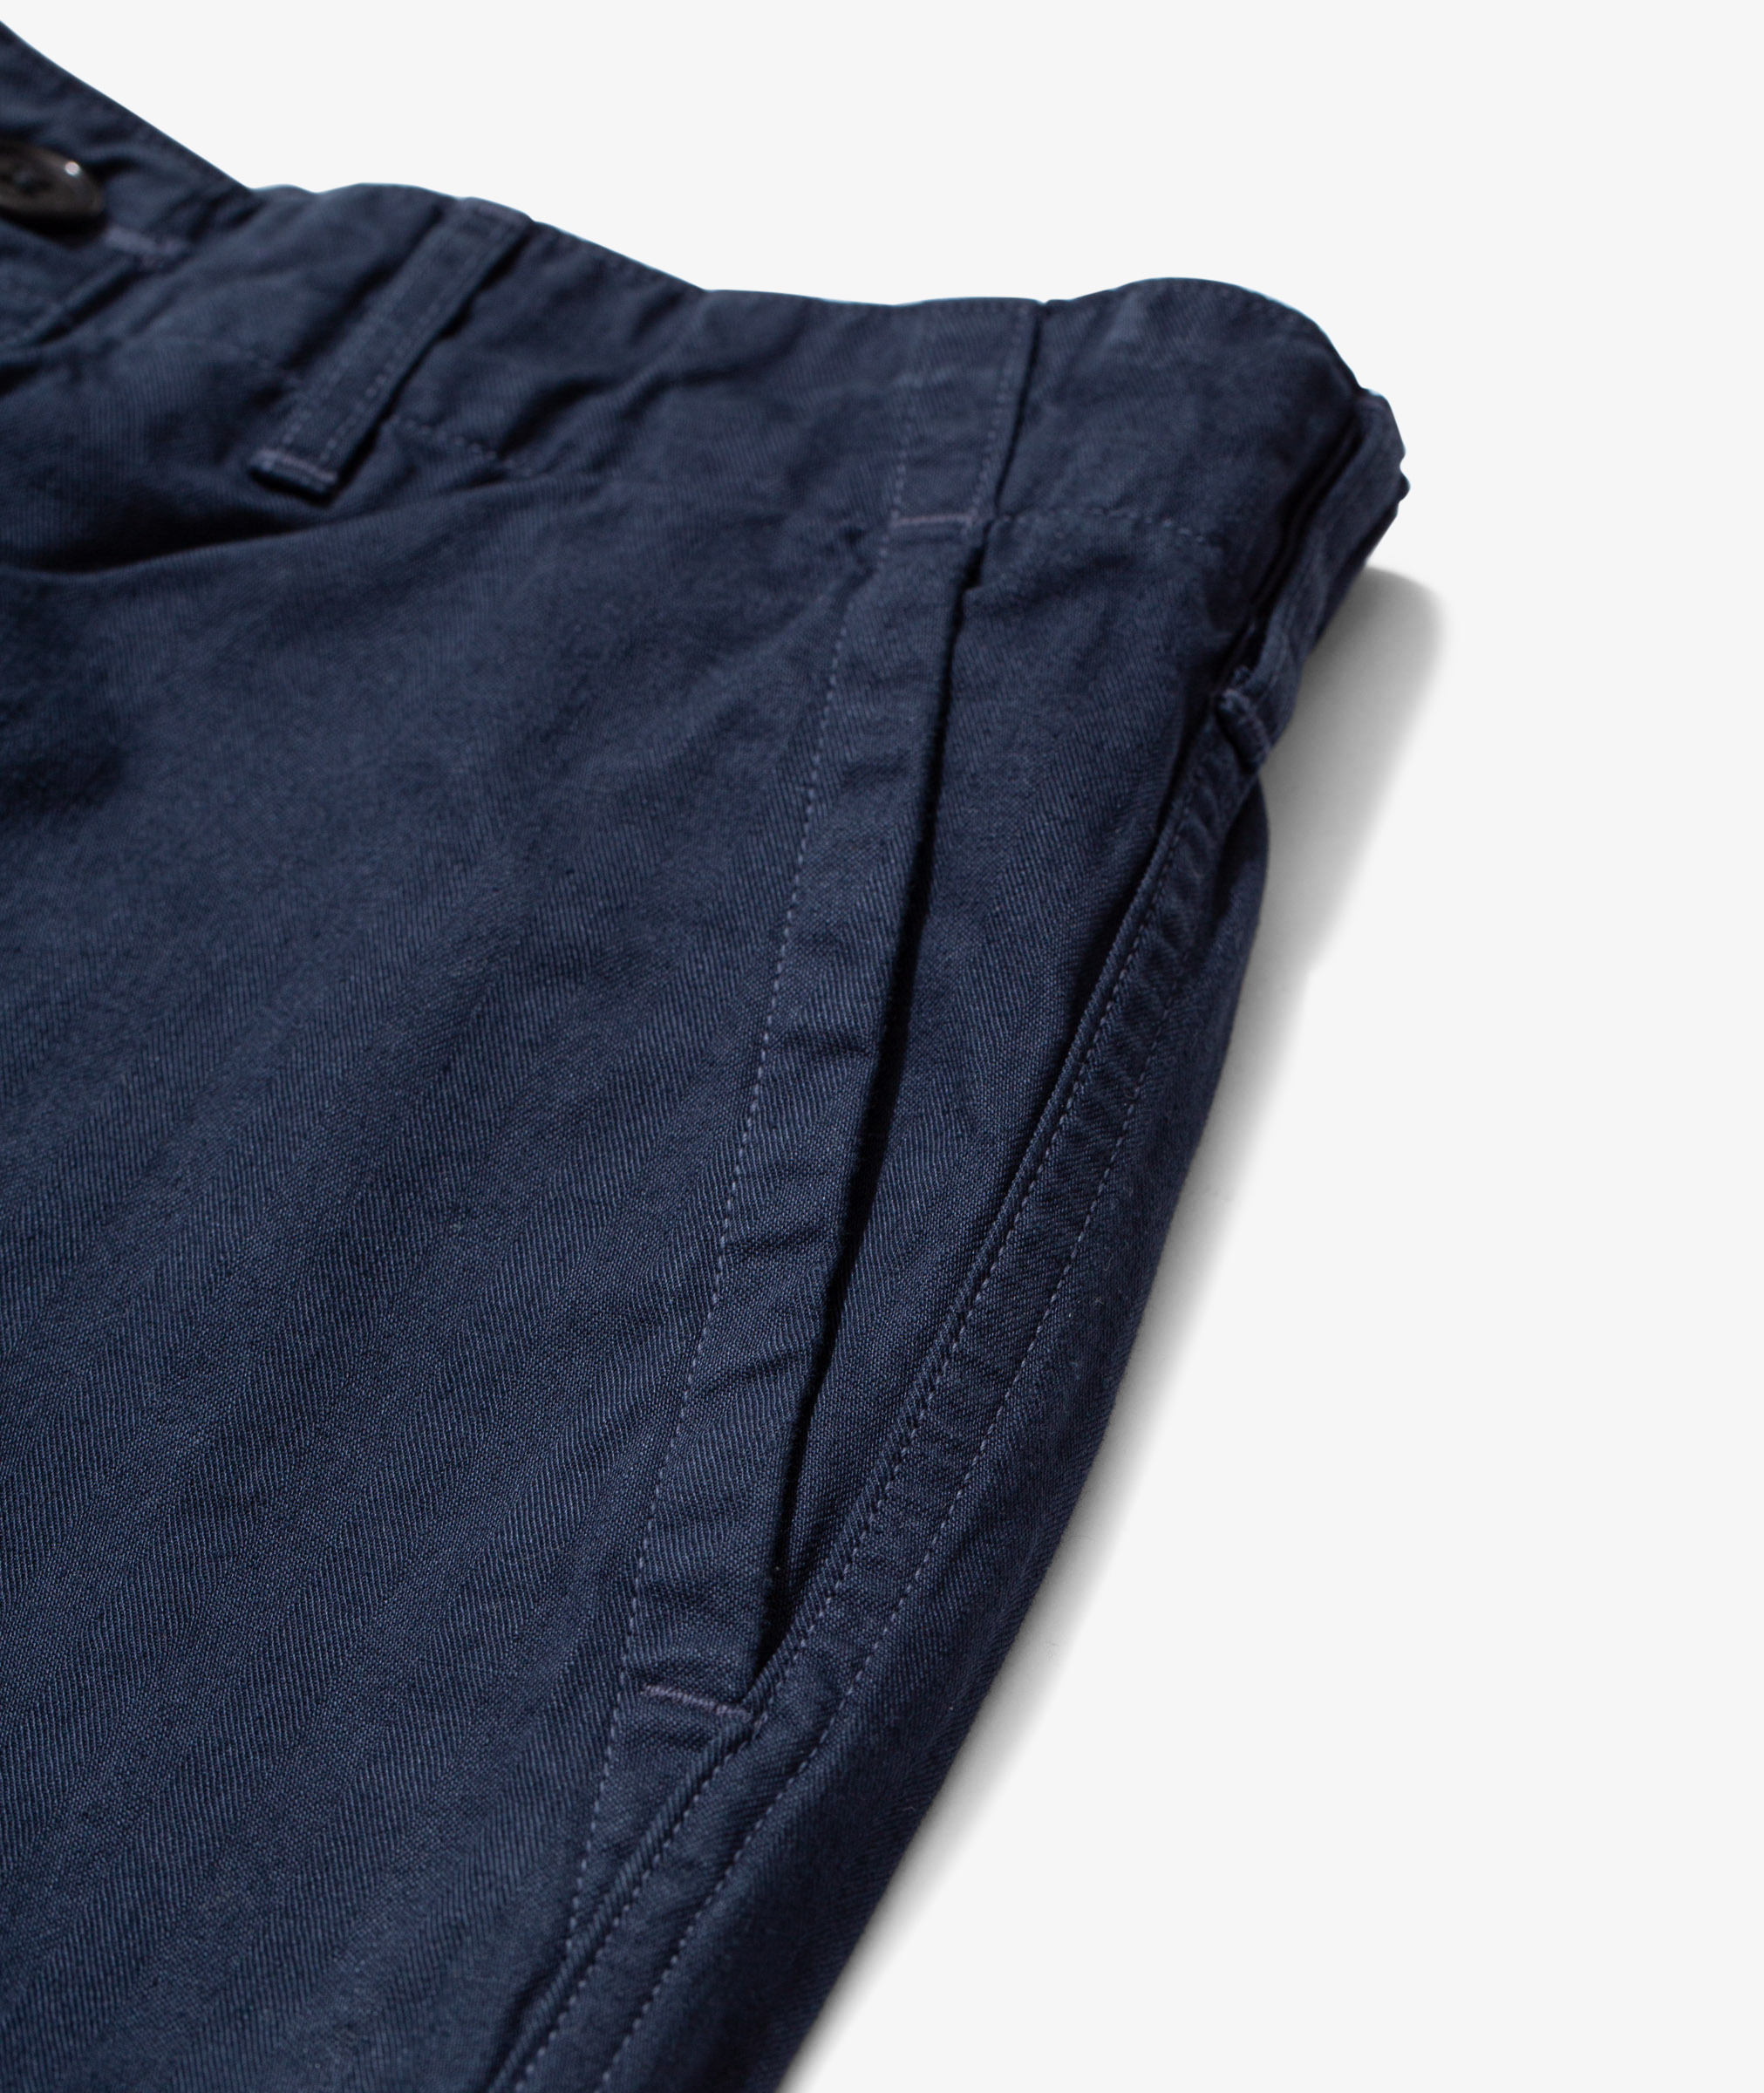 Norse Store | Shipping Worldwide - orSlow French Work Pant - Dark Navy